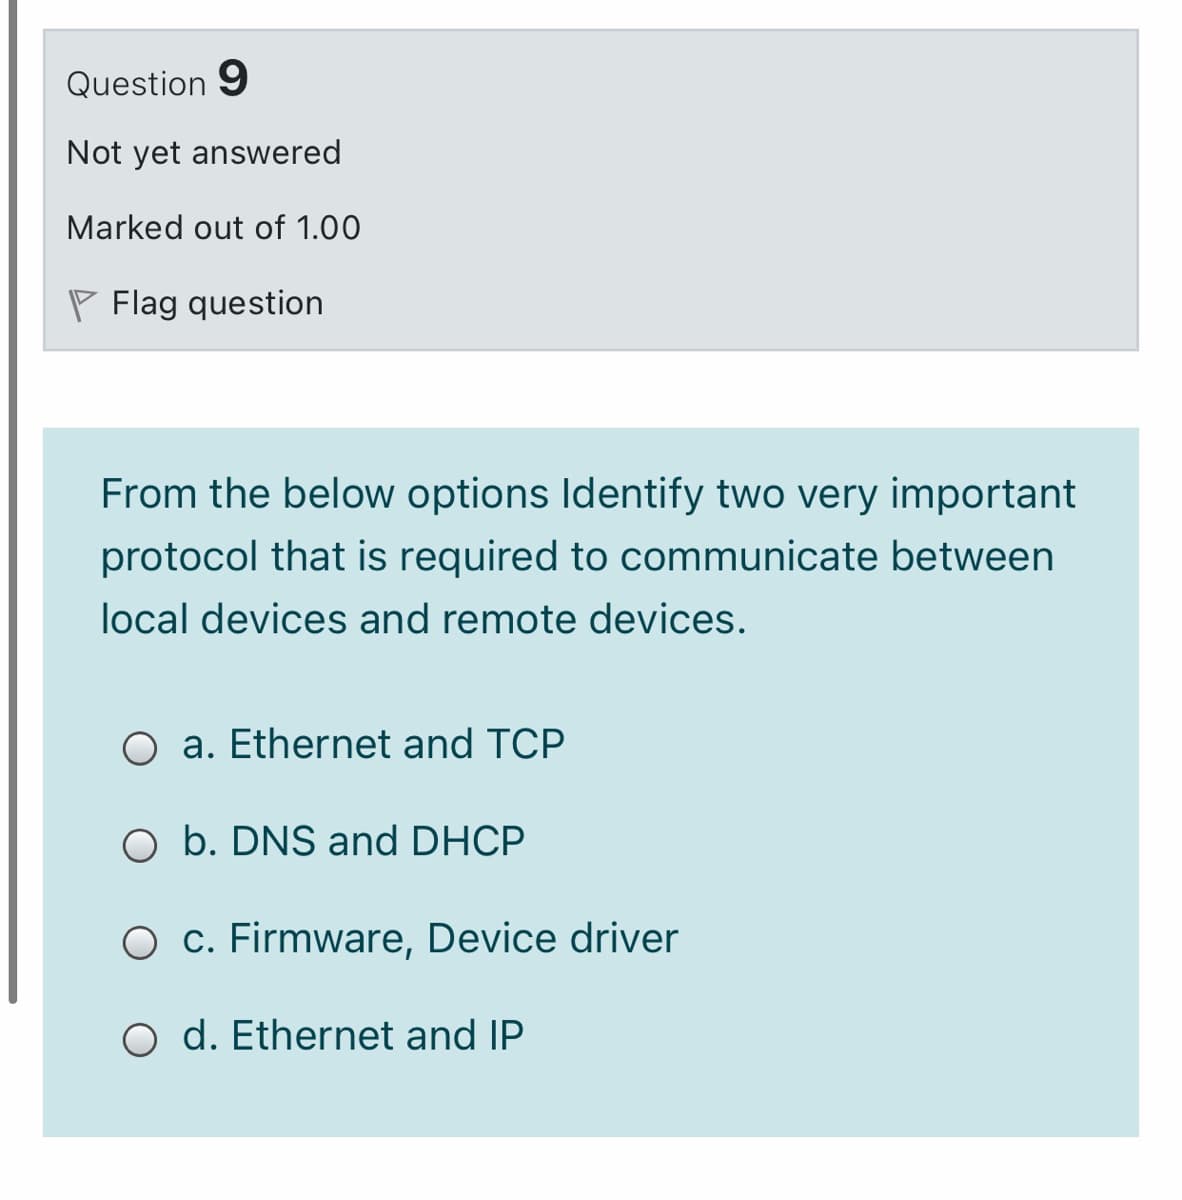 Question 9
Not yet answered
Marked out of 1.00
P Flag question
From the below options Identify two very important
protocol that is required to communicate between
local devices and remote devices.
O a. Ethernet and TCP
O b. DNS and DHCP
O c. Firmware, Device driver
O d. Ethernet and IP
